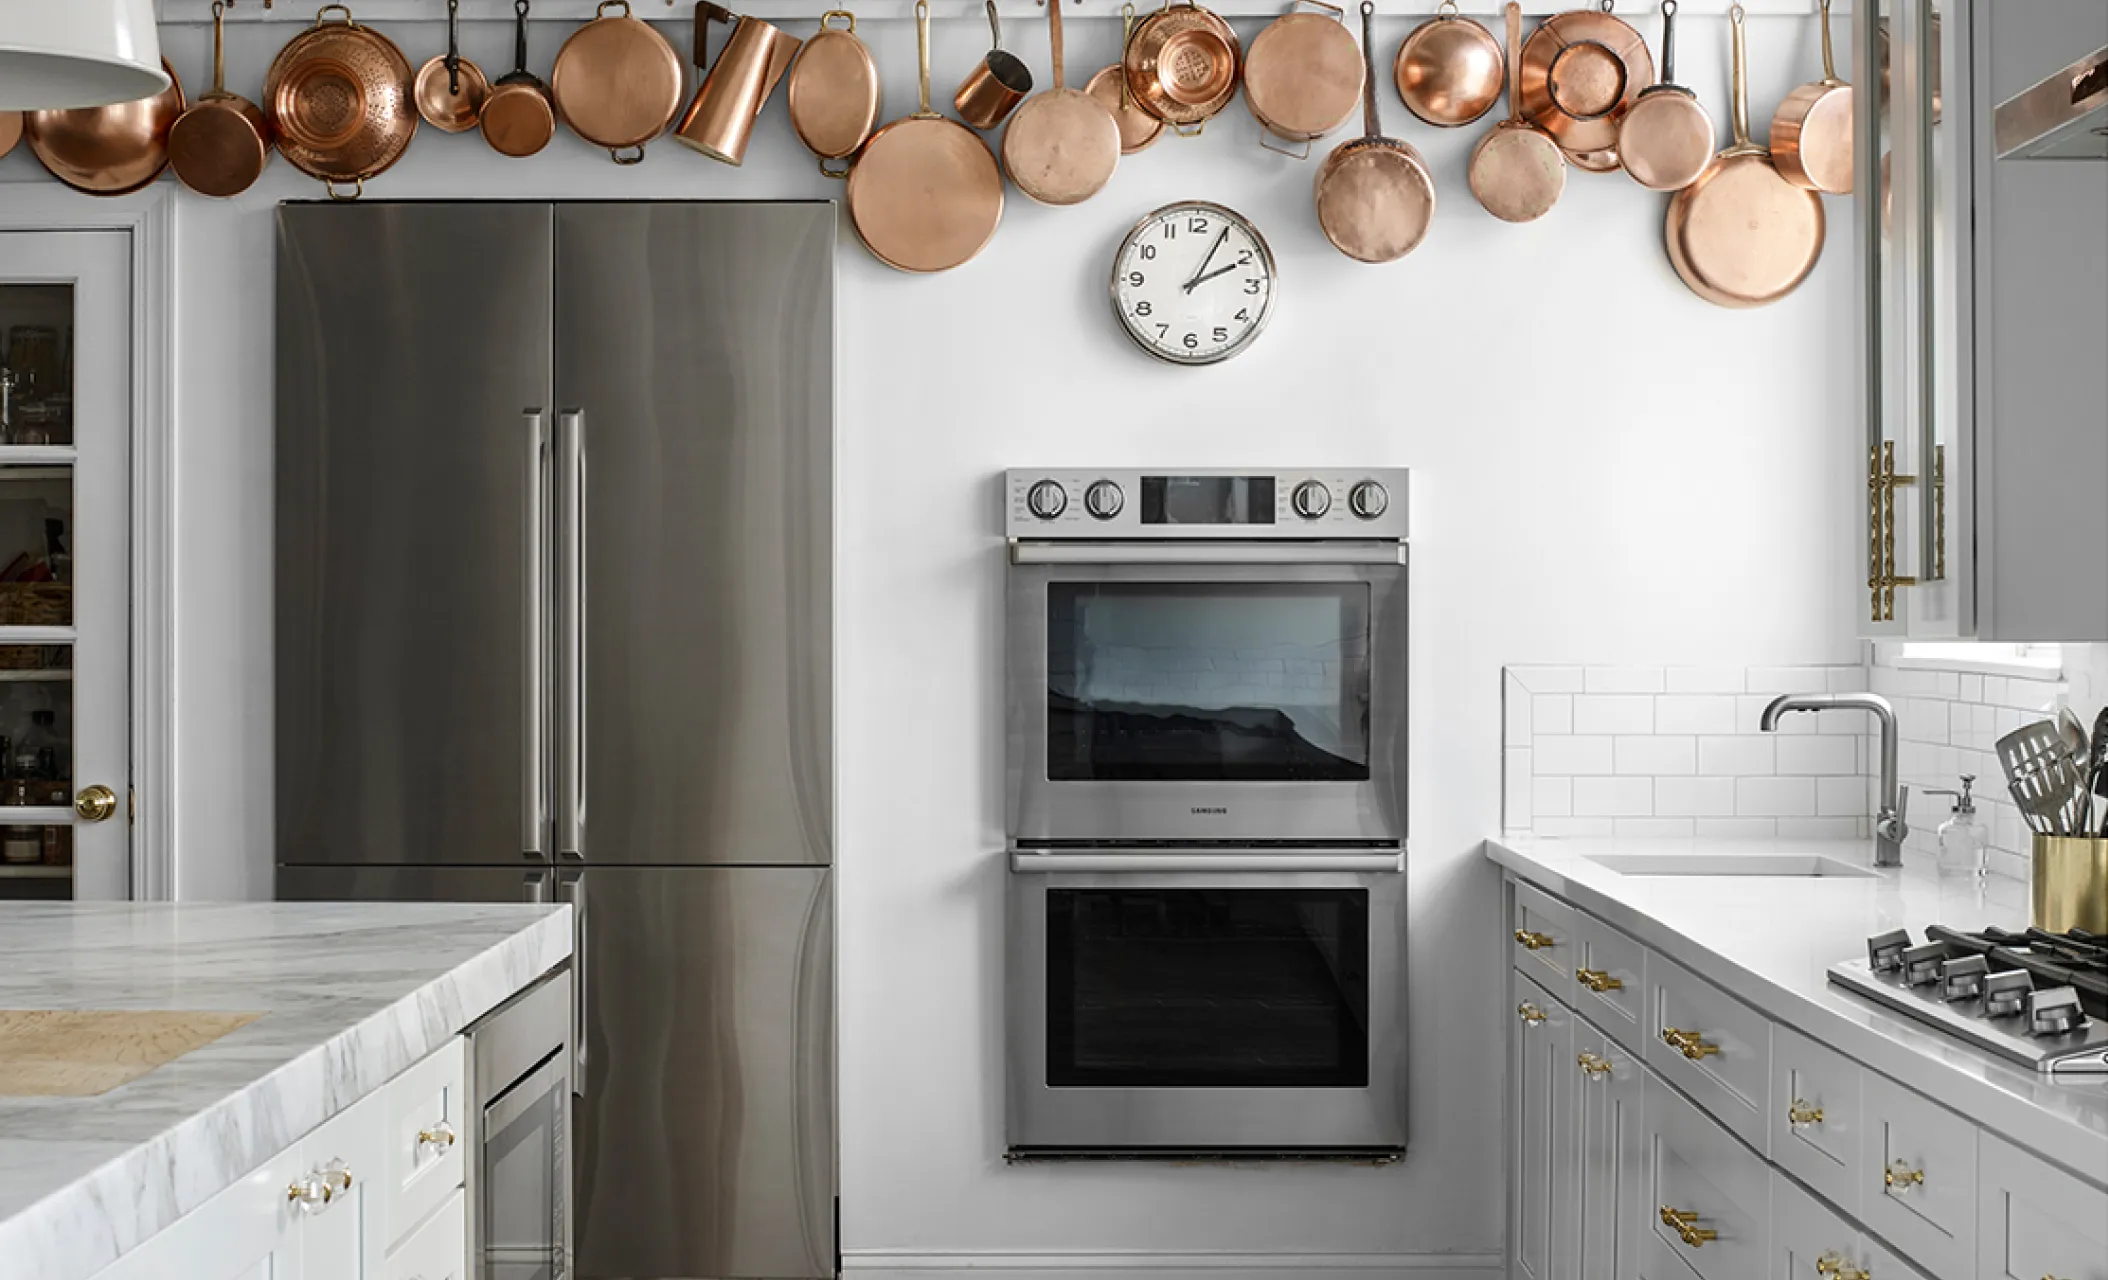 Kitchen studio with double oven and decorative copper cookware